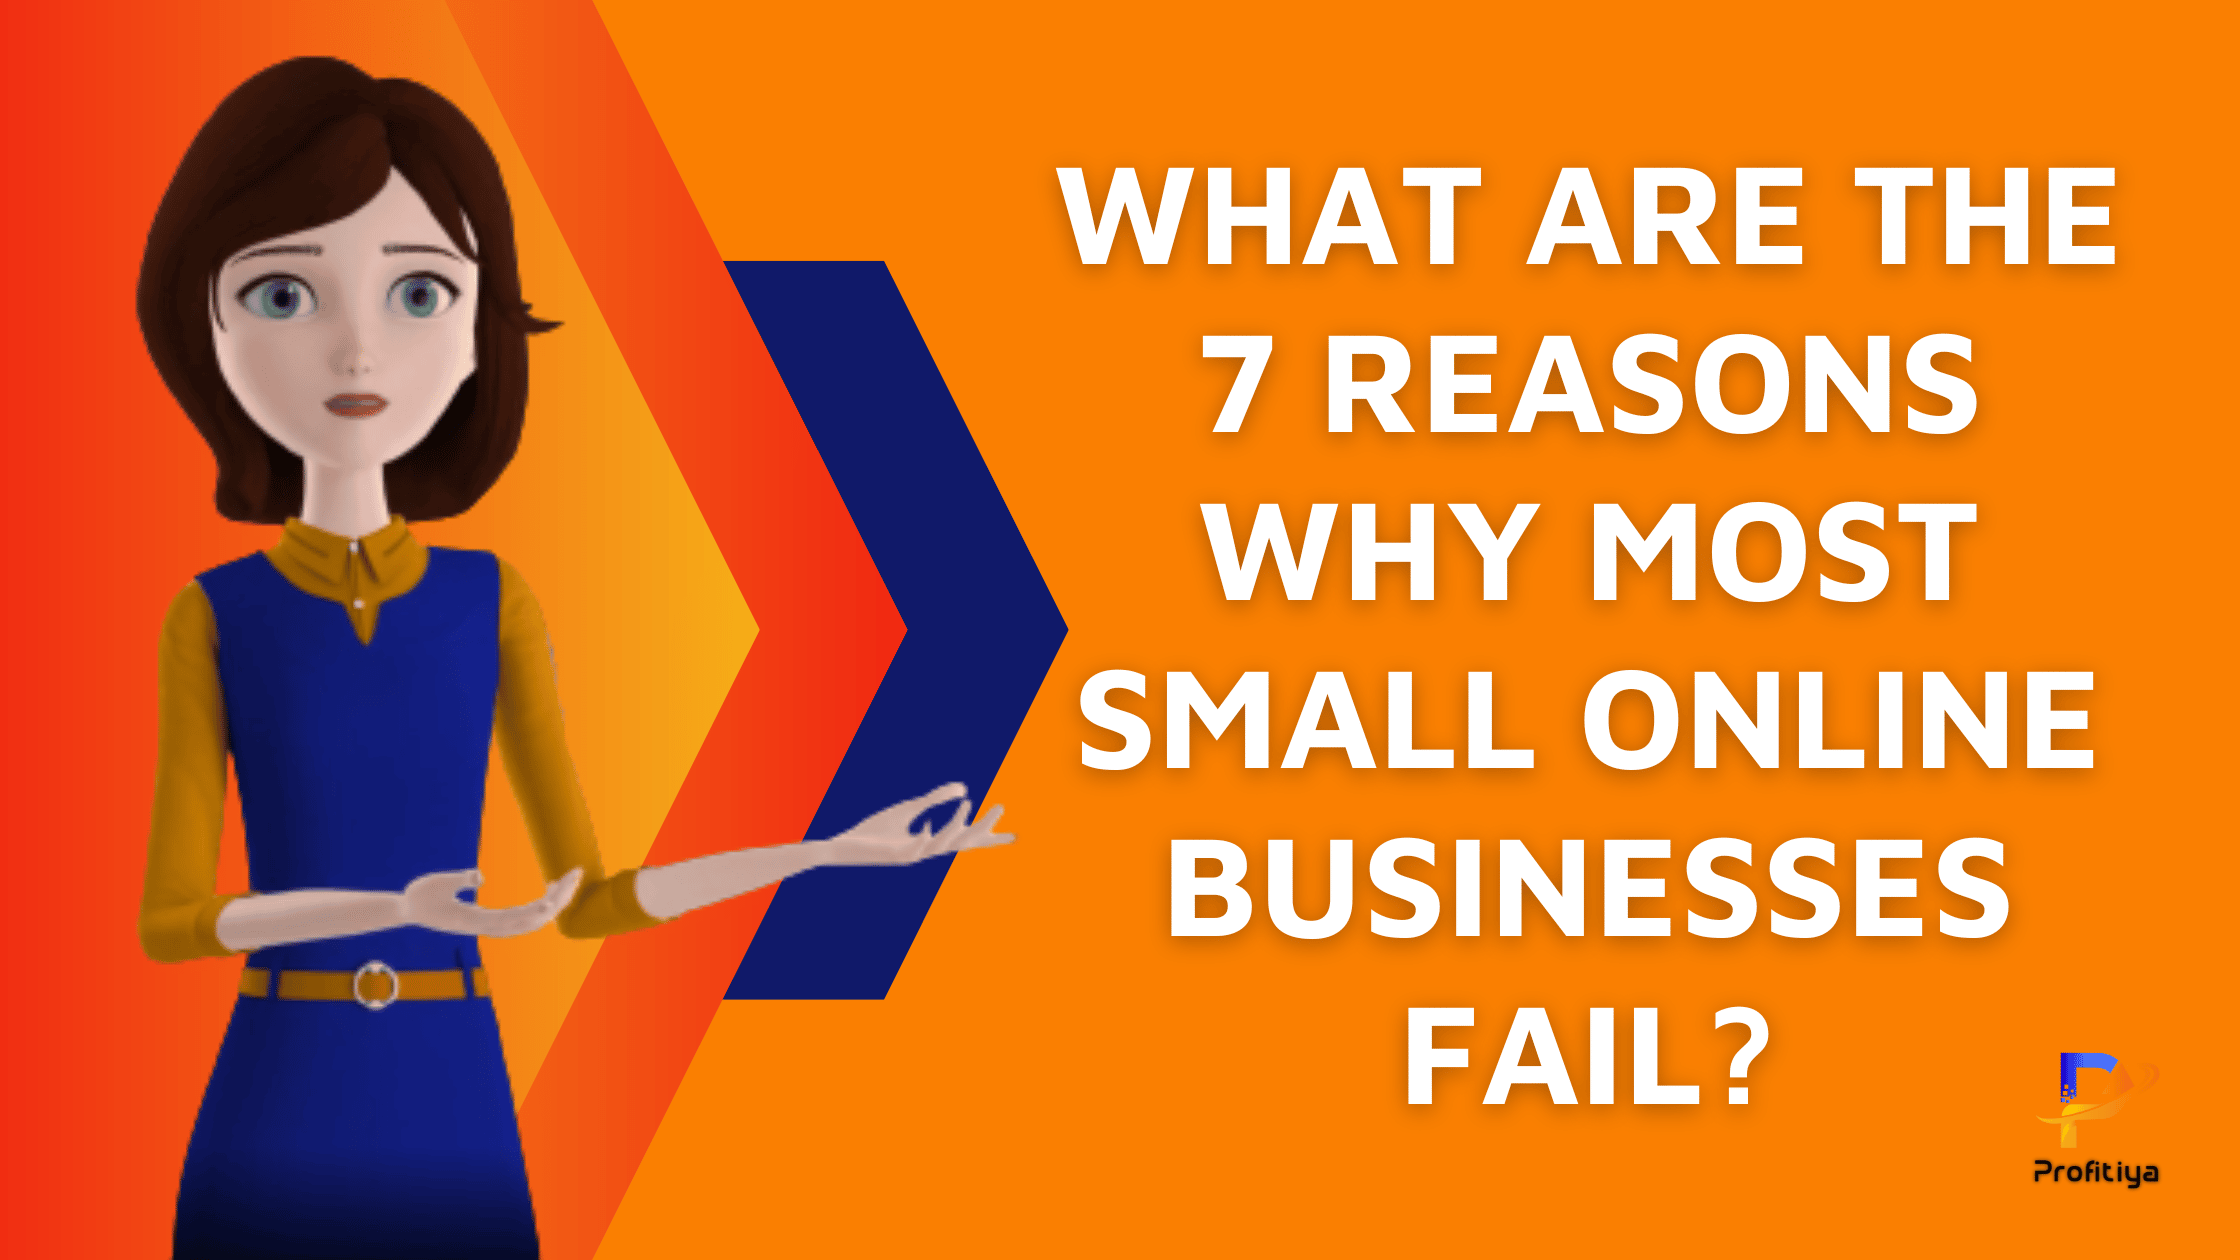 What Are The 7 Reasons Why Most Small Online Businesses Fail